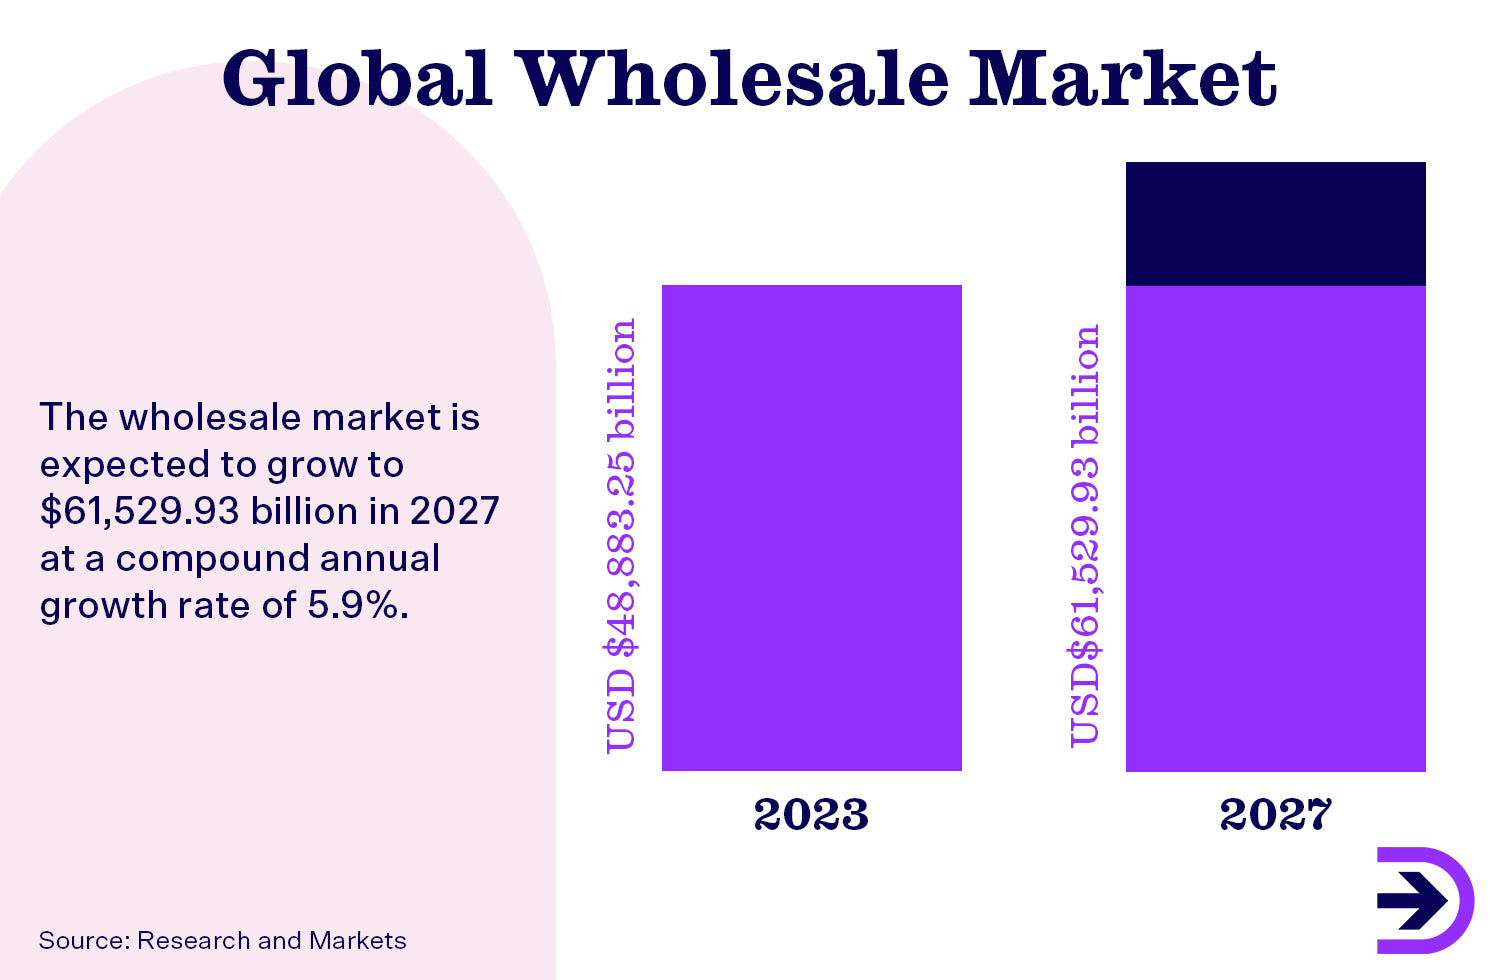 The wholesale market is expected to grow to $61,529.93 billion in 2027 at a CAGR of 5.9%.